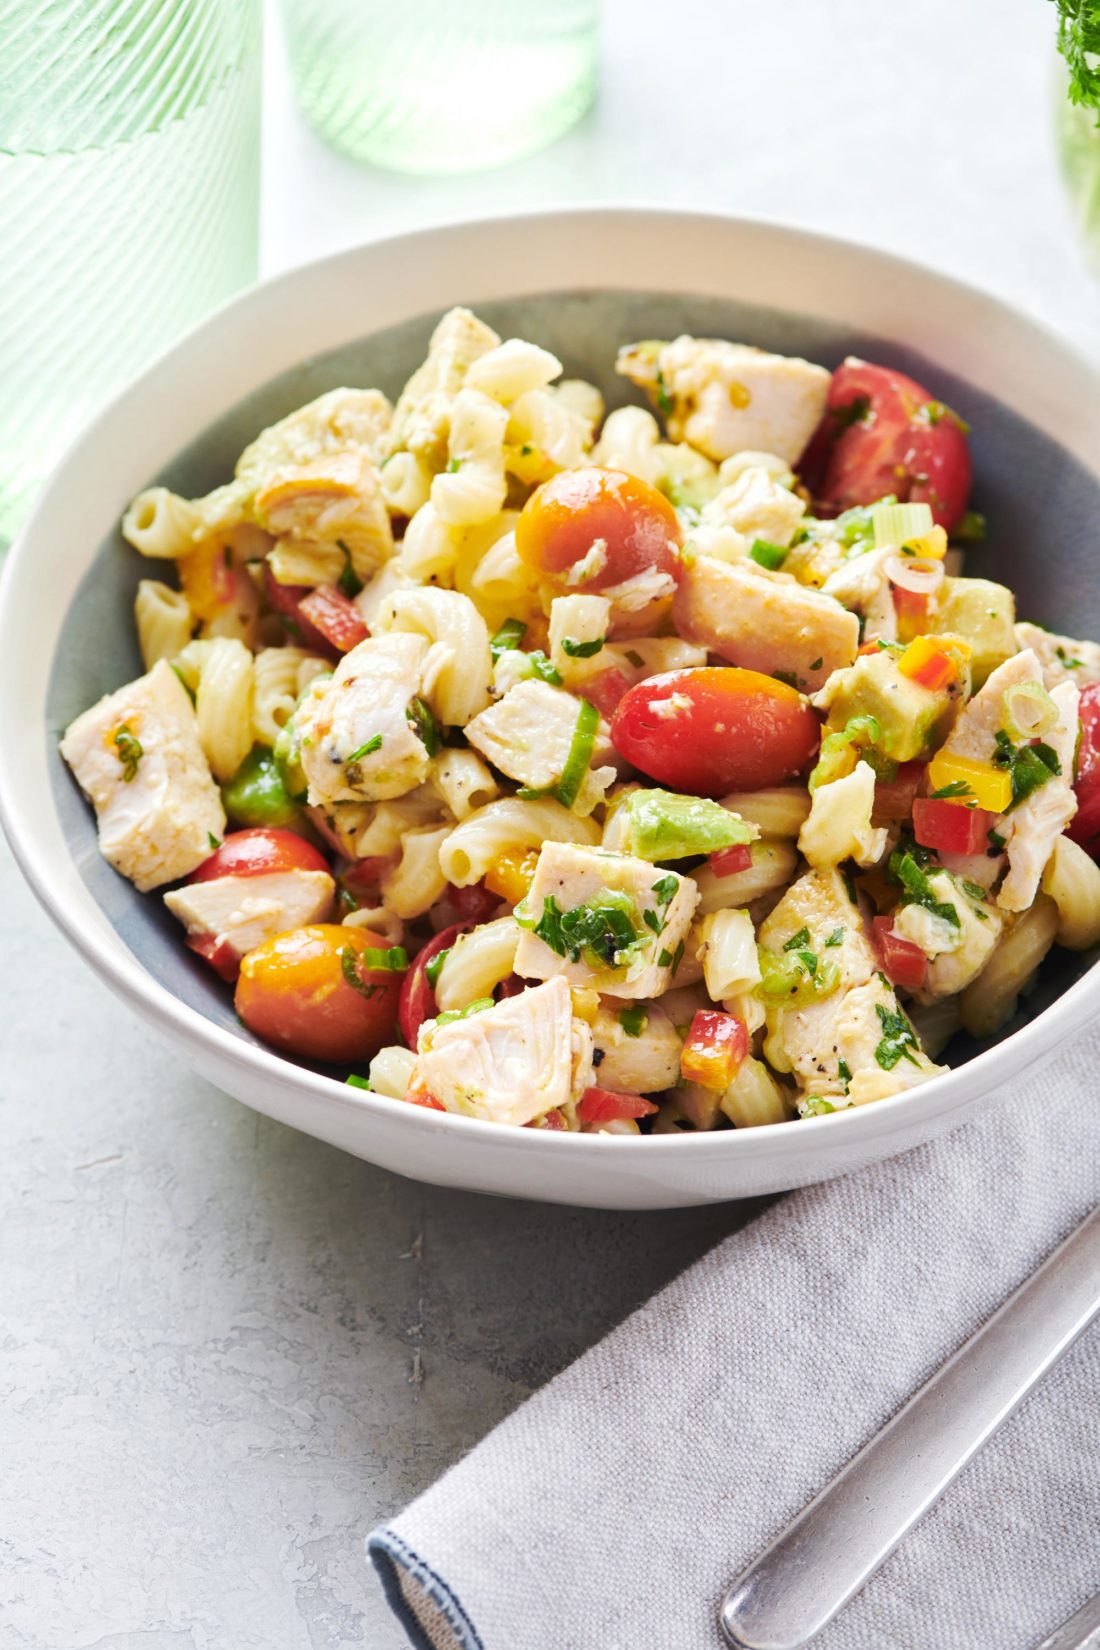 Bowl of Pasta Salad with Chicken, Avocado and Tomato on a table.